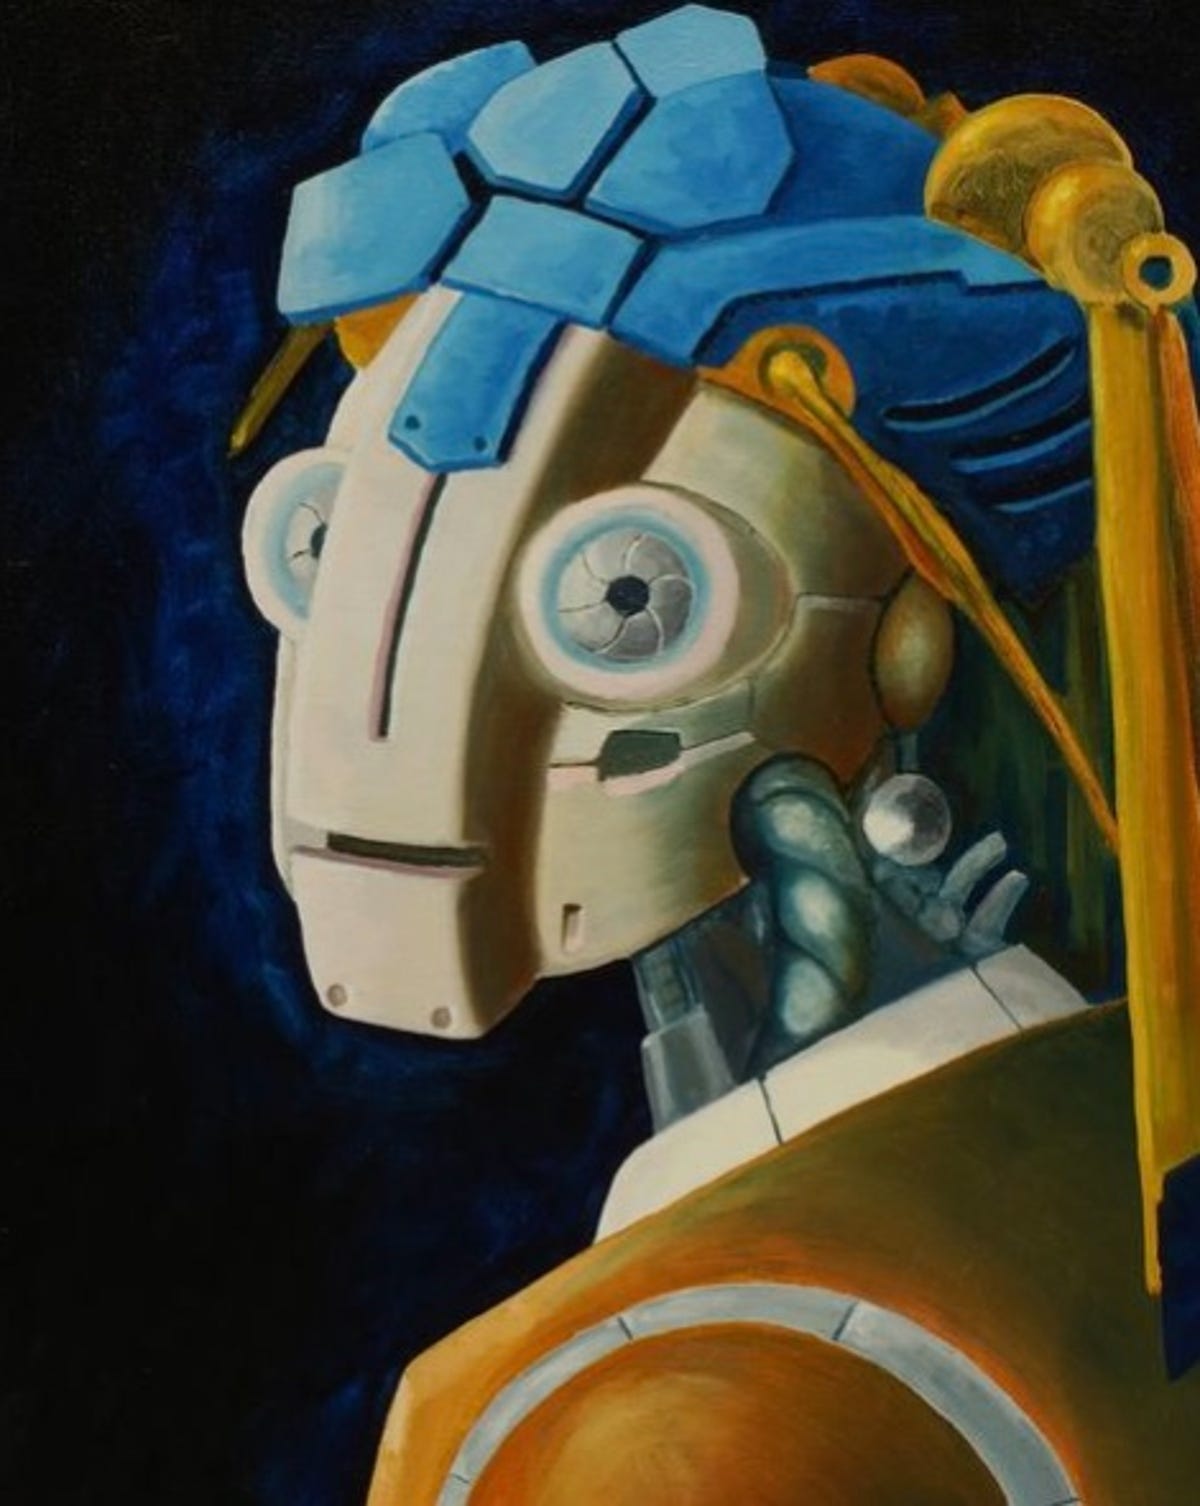 The Girl with the Pearl Earring has a robot instead of a girl